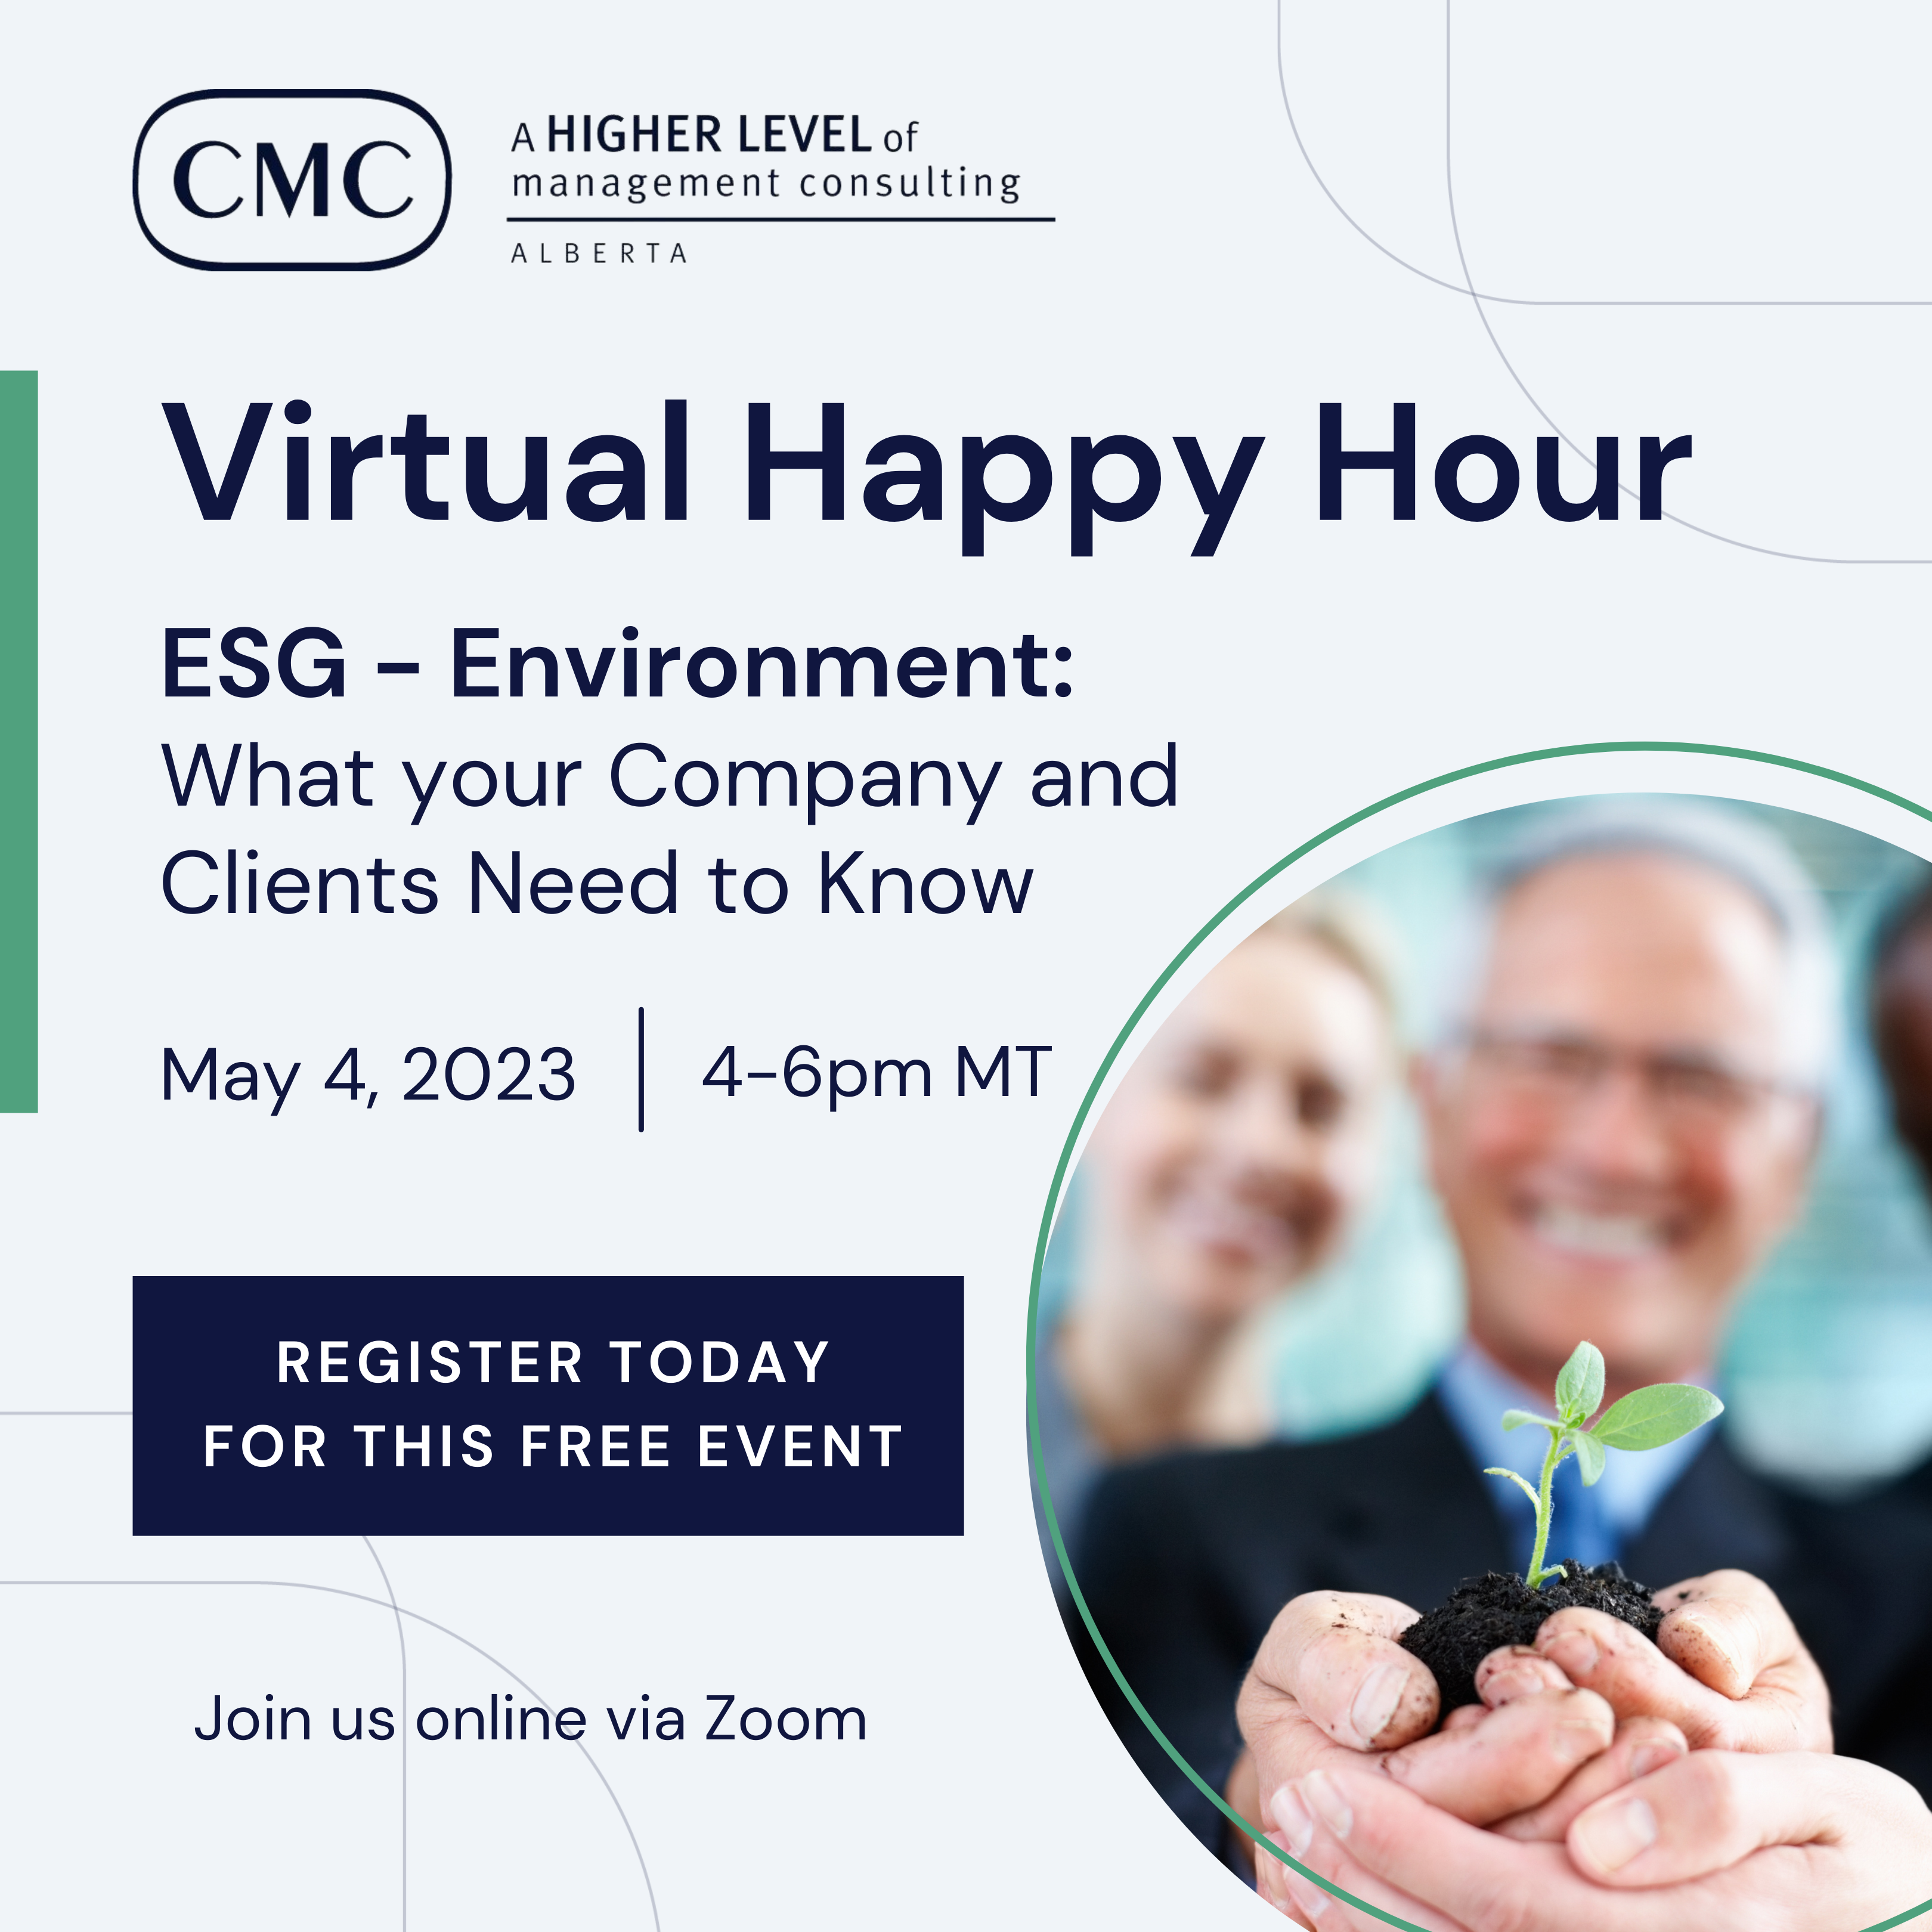 AB Virtual Happy Hour - ESG's Environment: What your company and clients need to know.